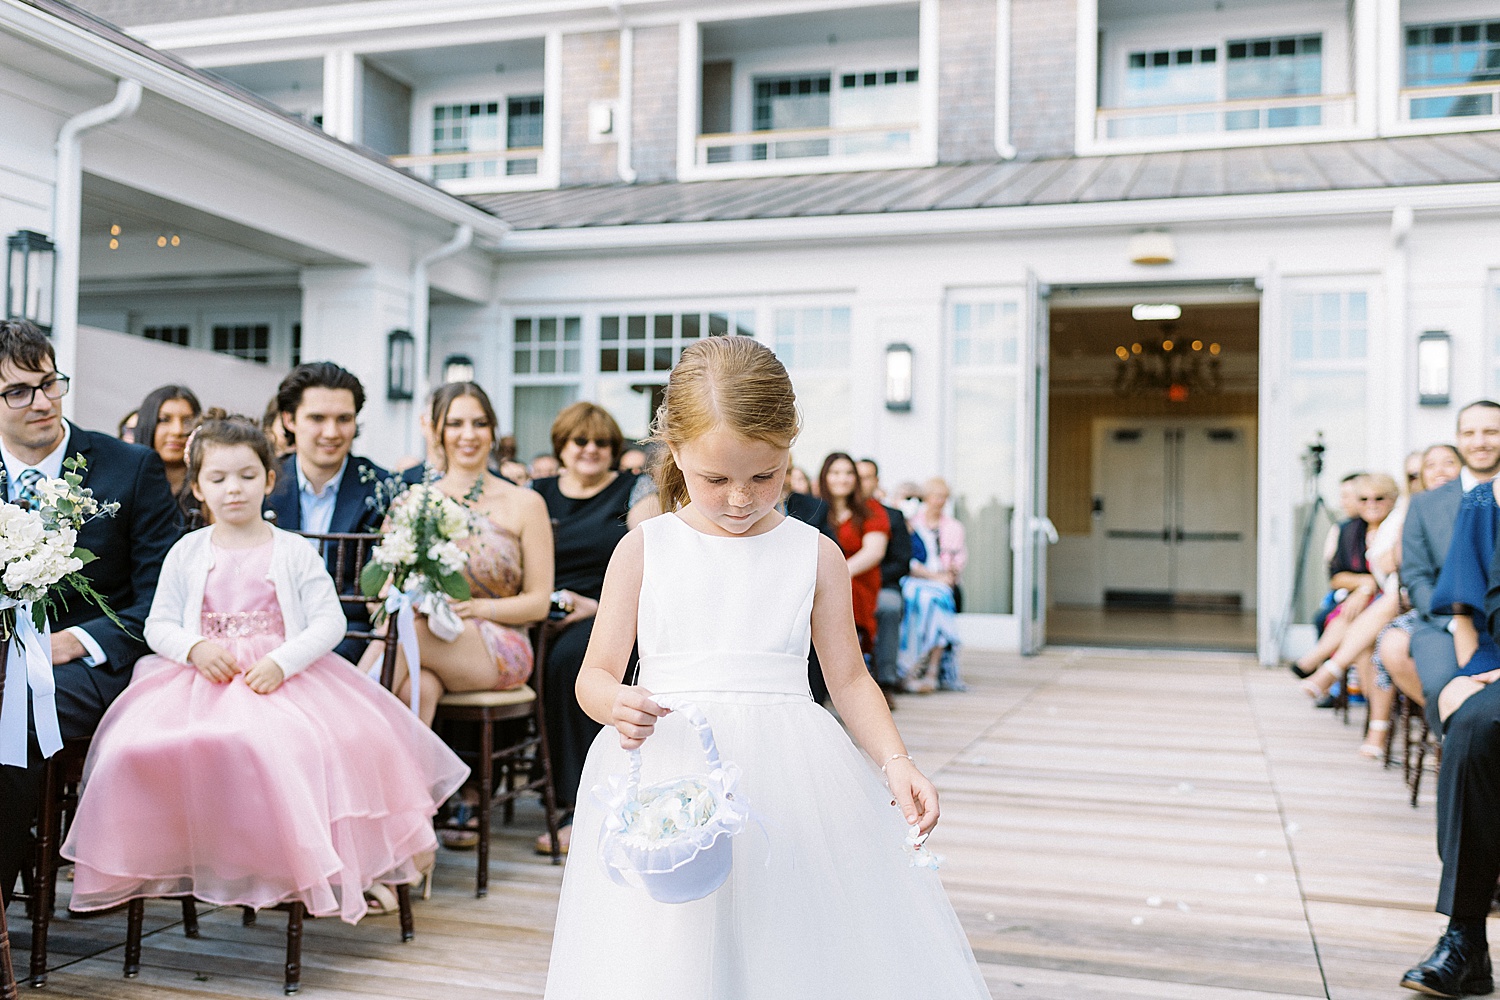 Flowergirl walking down the aisle on outside deck at Beauport Hotel